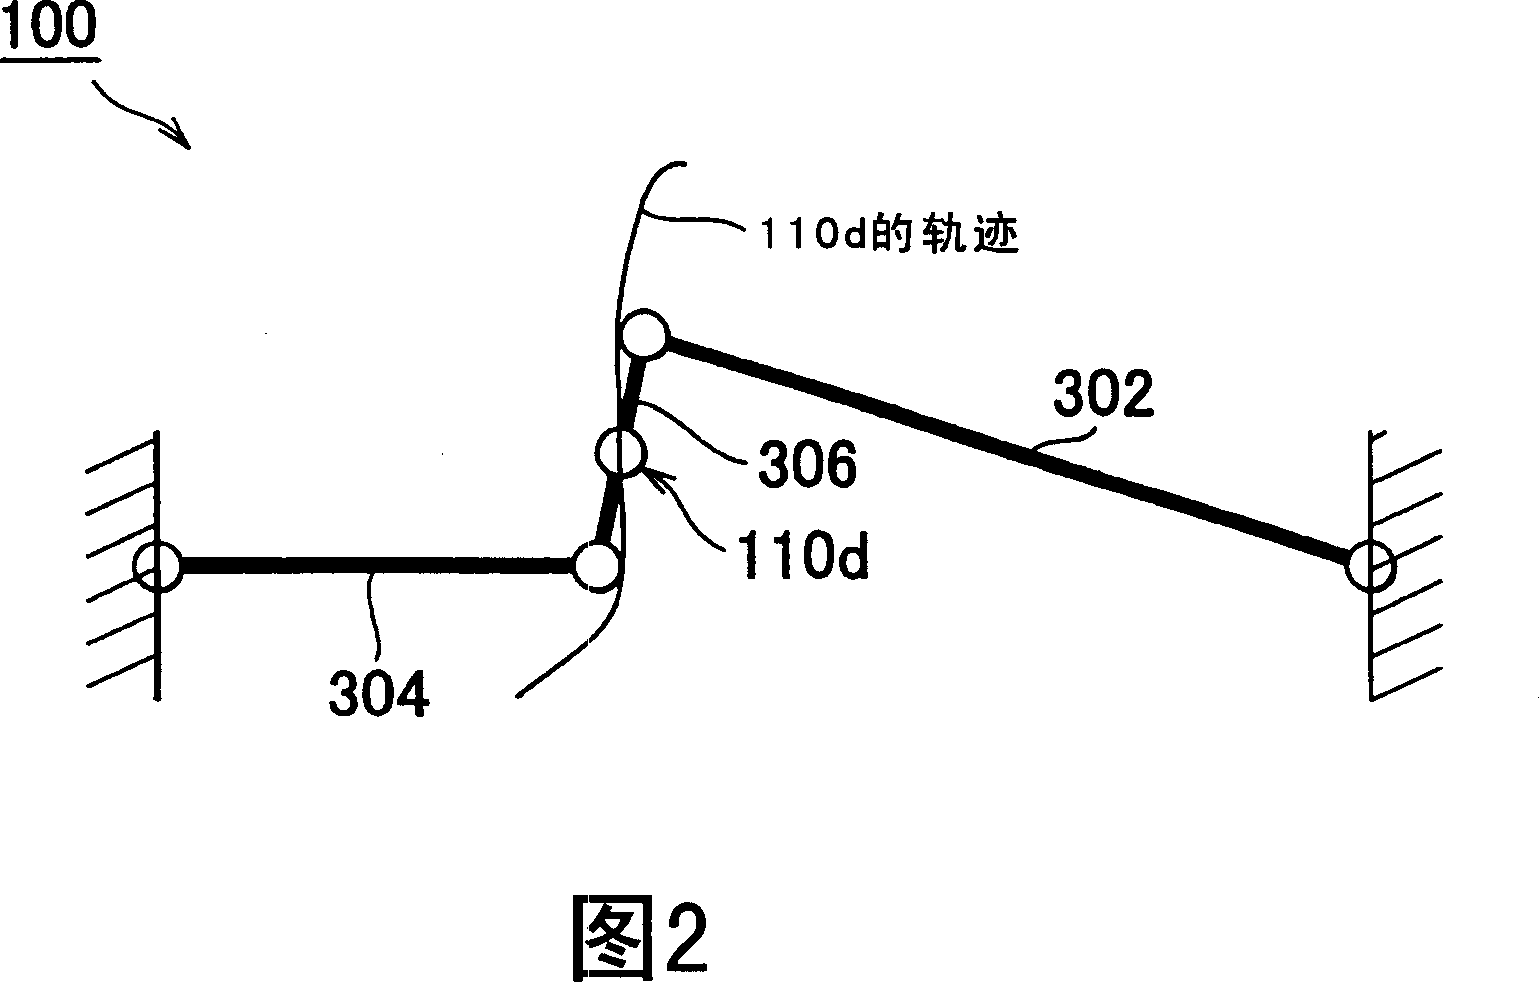 Steering apparatus for a vehicle